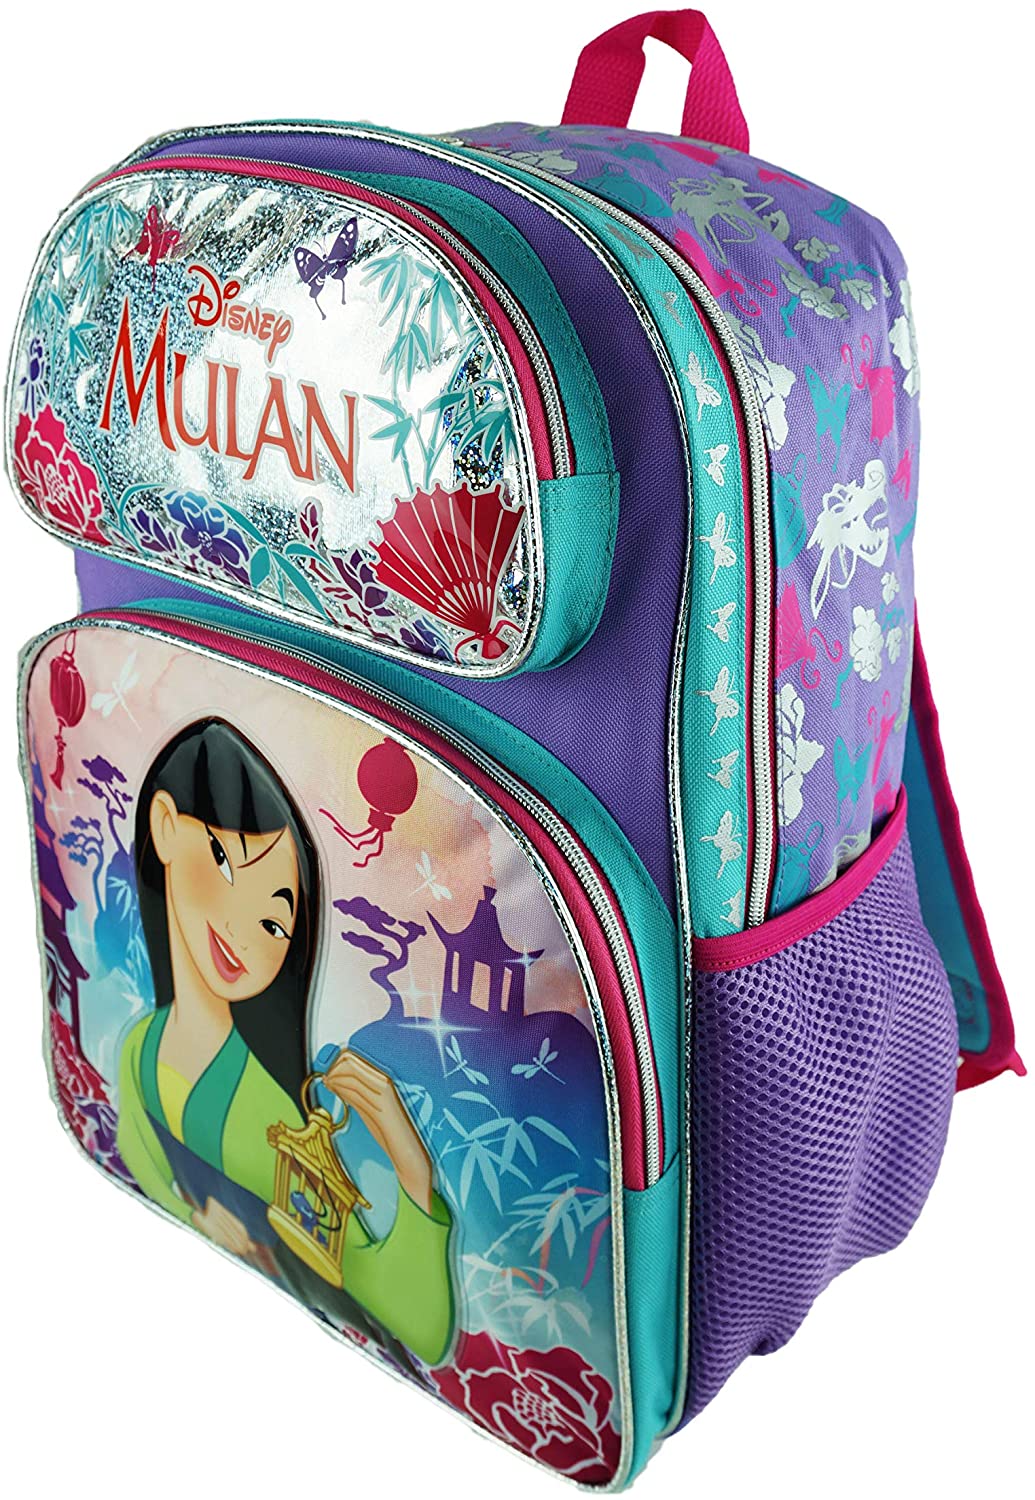 Disney Mulan 16" Full Size Backpack - Pretty and Brave - A19393